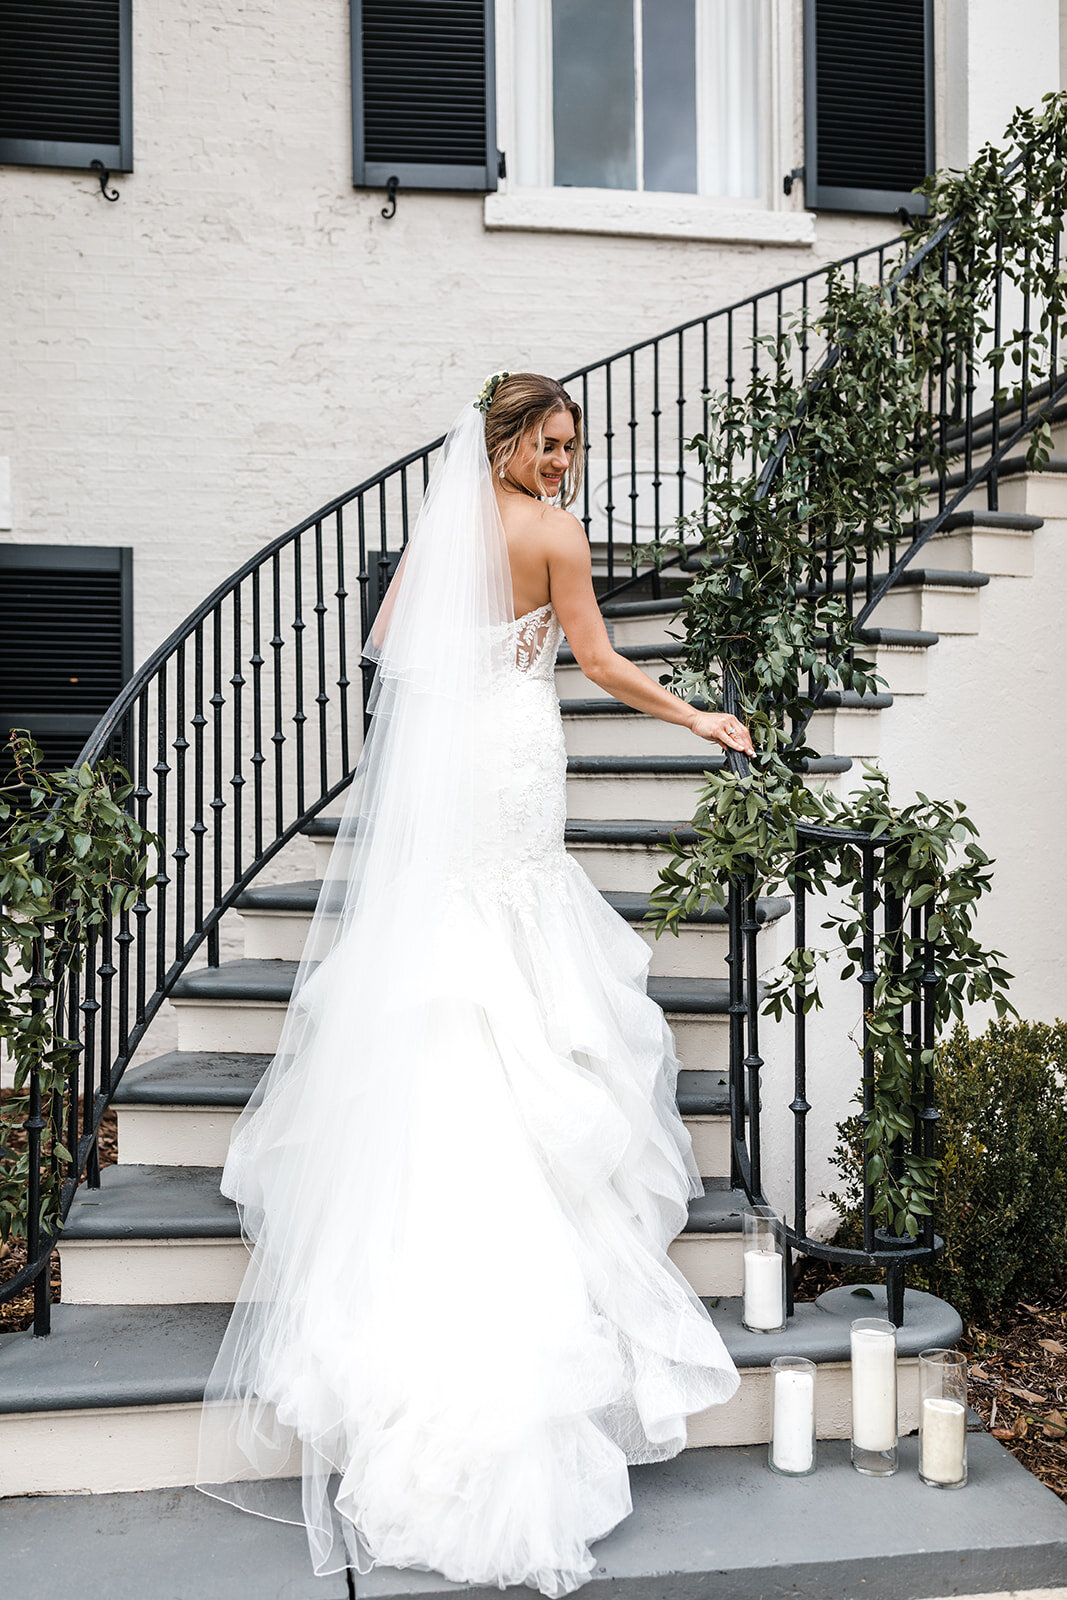 ivory-and-bride-down-for-the-gown-cassie-real-bride-wedding-dress-maggie-sottero-blog-bridal-blog-wedding-dress-mermaid-bridal-gown-wedding-gown-bridal-shop-bridal-boutique-bridal-shopping-bridal-style-savannah-georgia-GMP504-255.jpg